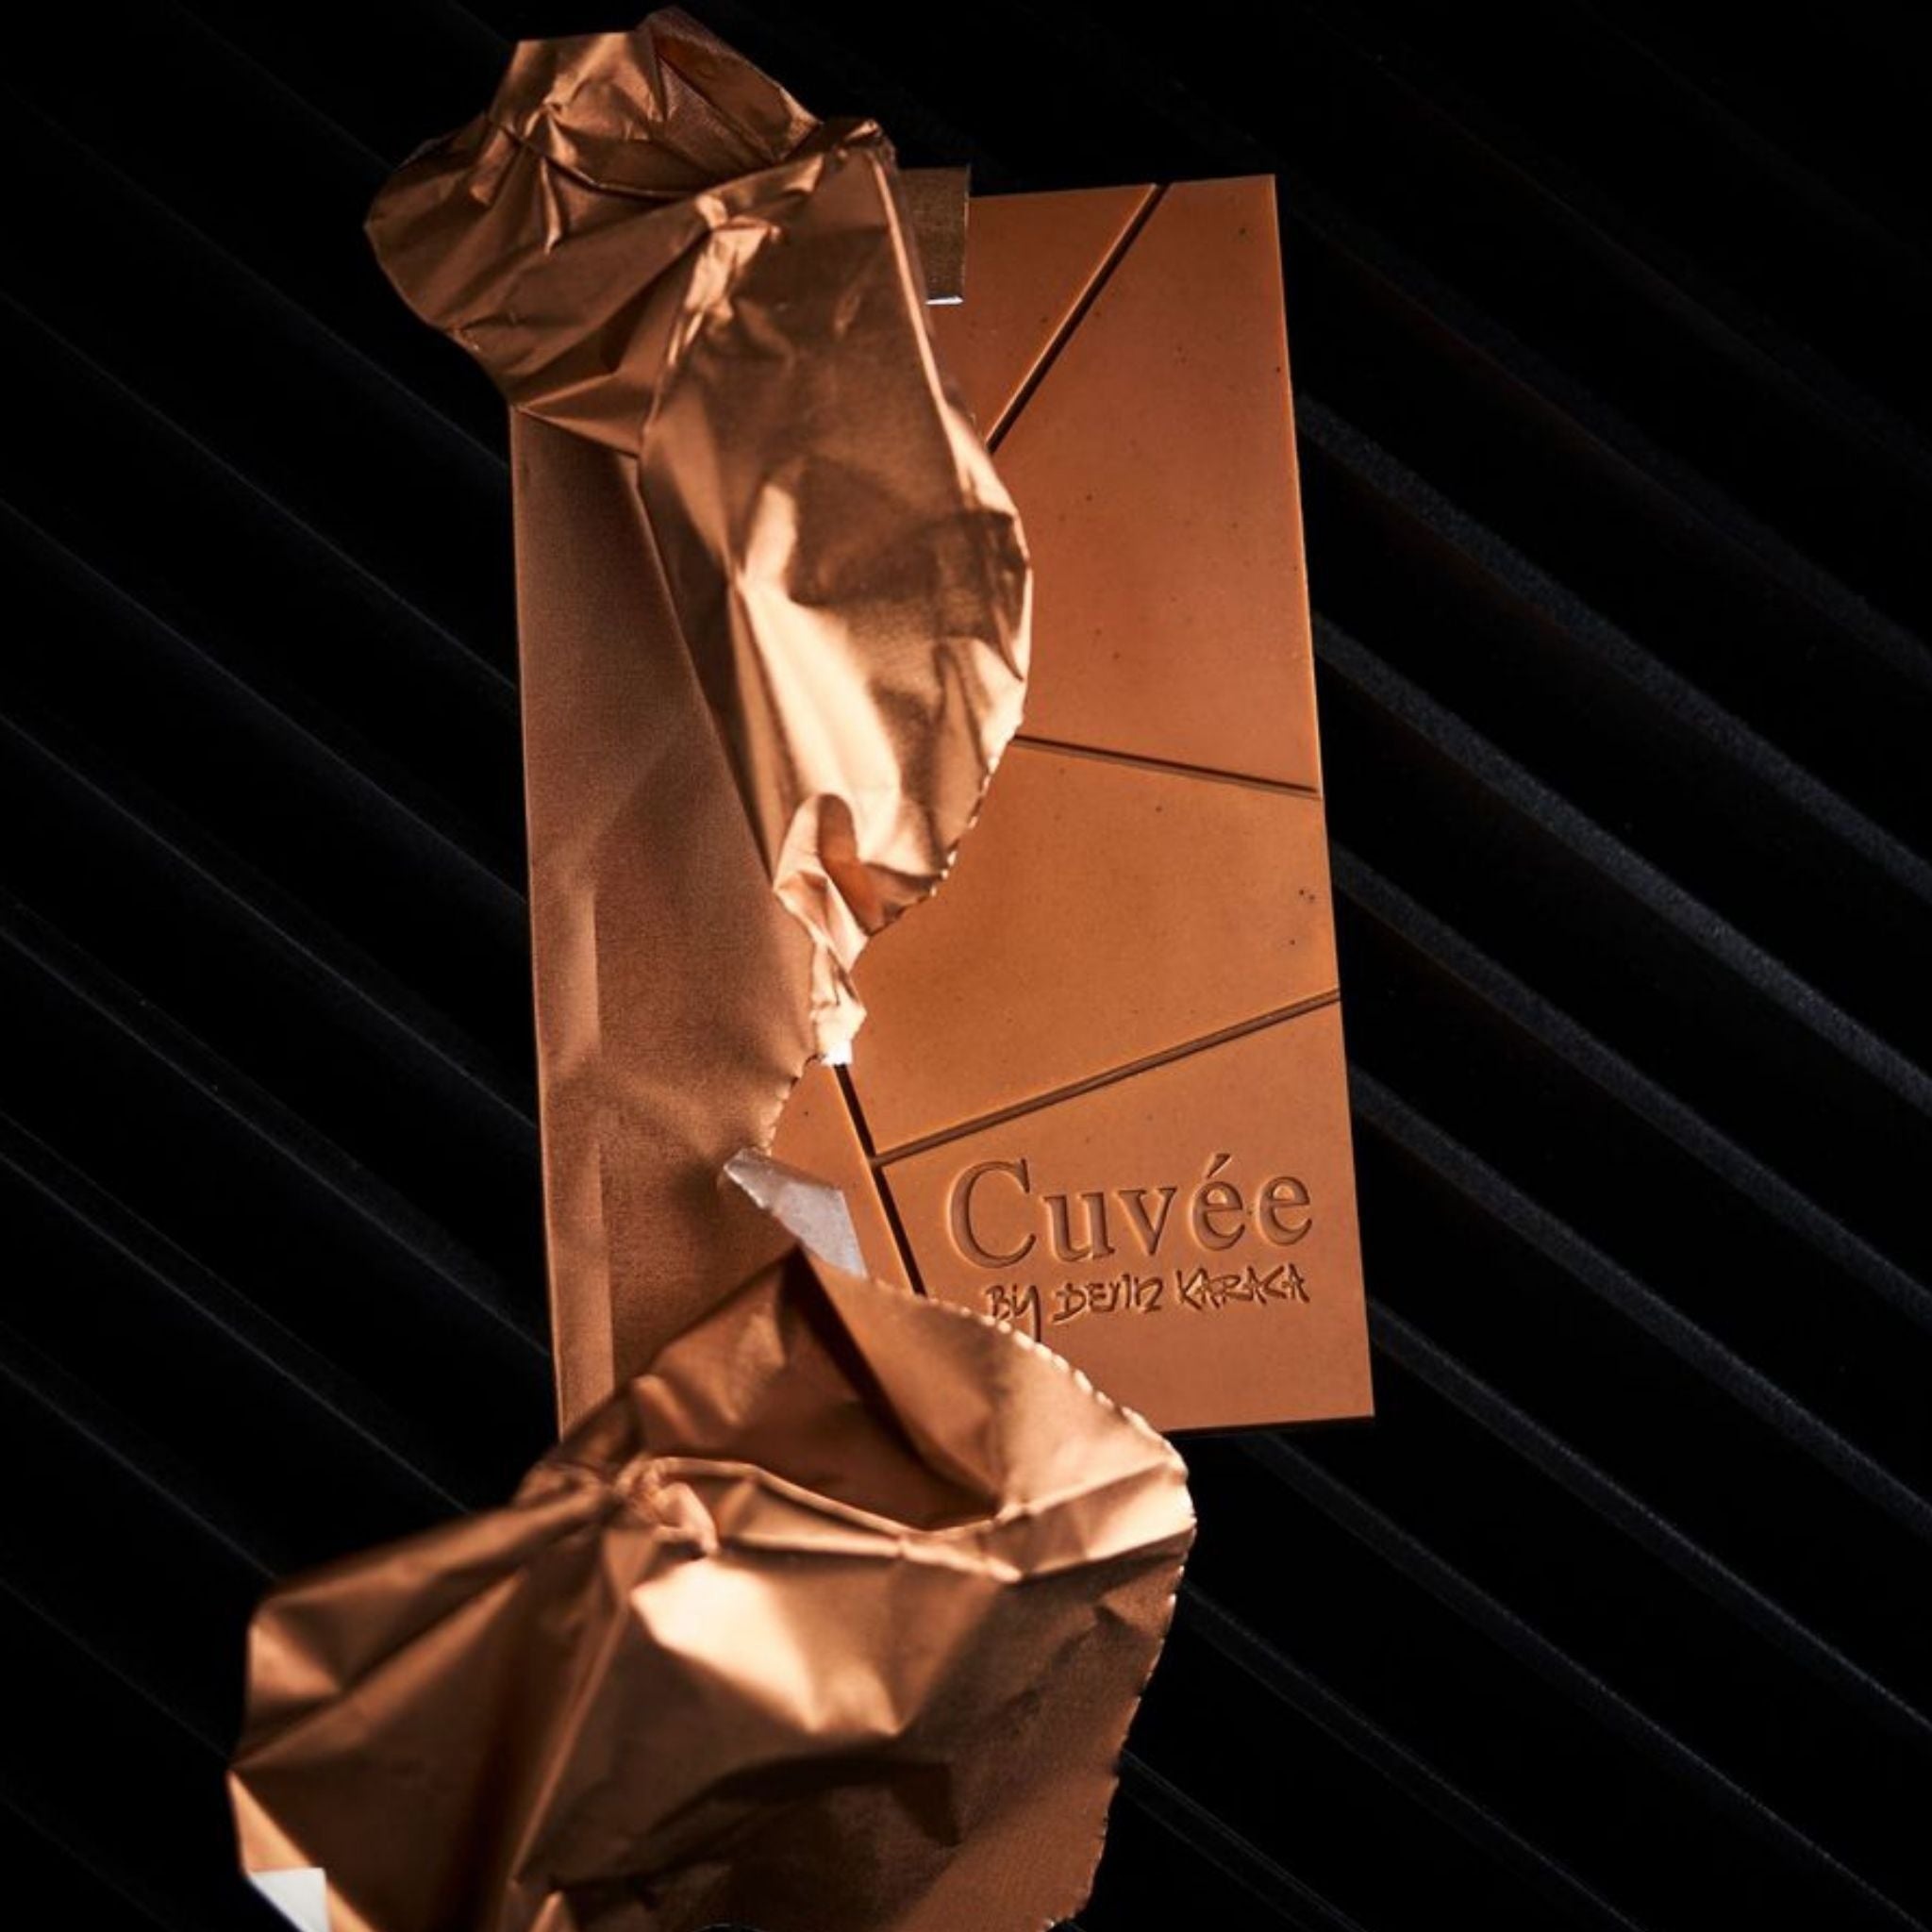 cuvee chocolate can be added to this hamper